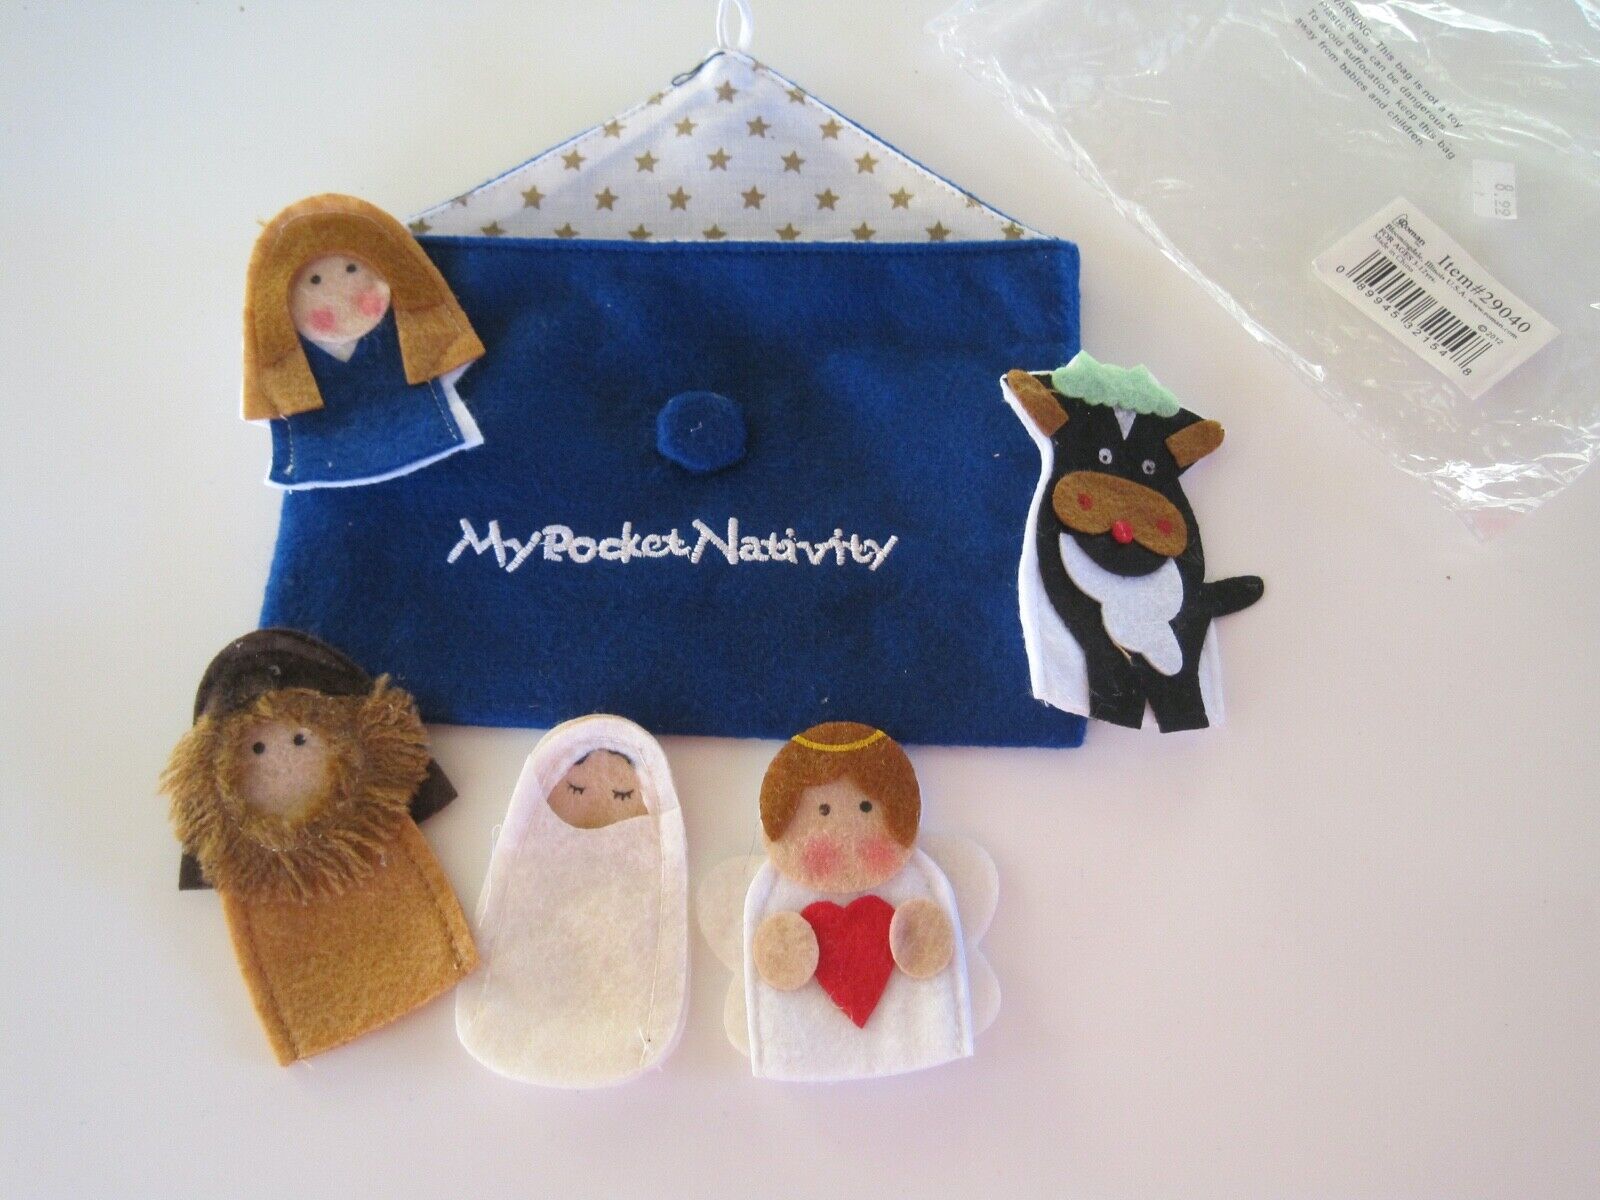 My Pocket Nativity Finger Puppets New In Fabric Envelope ROMAN BRAND